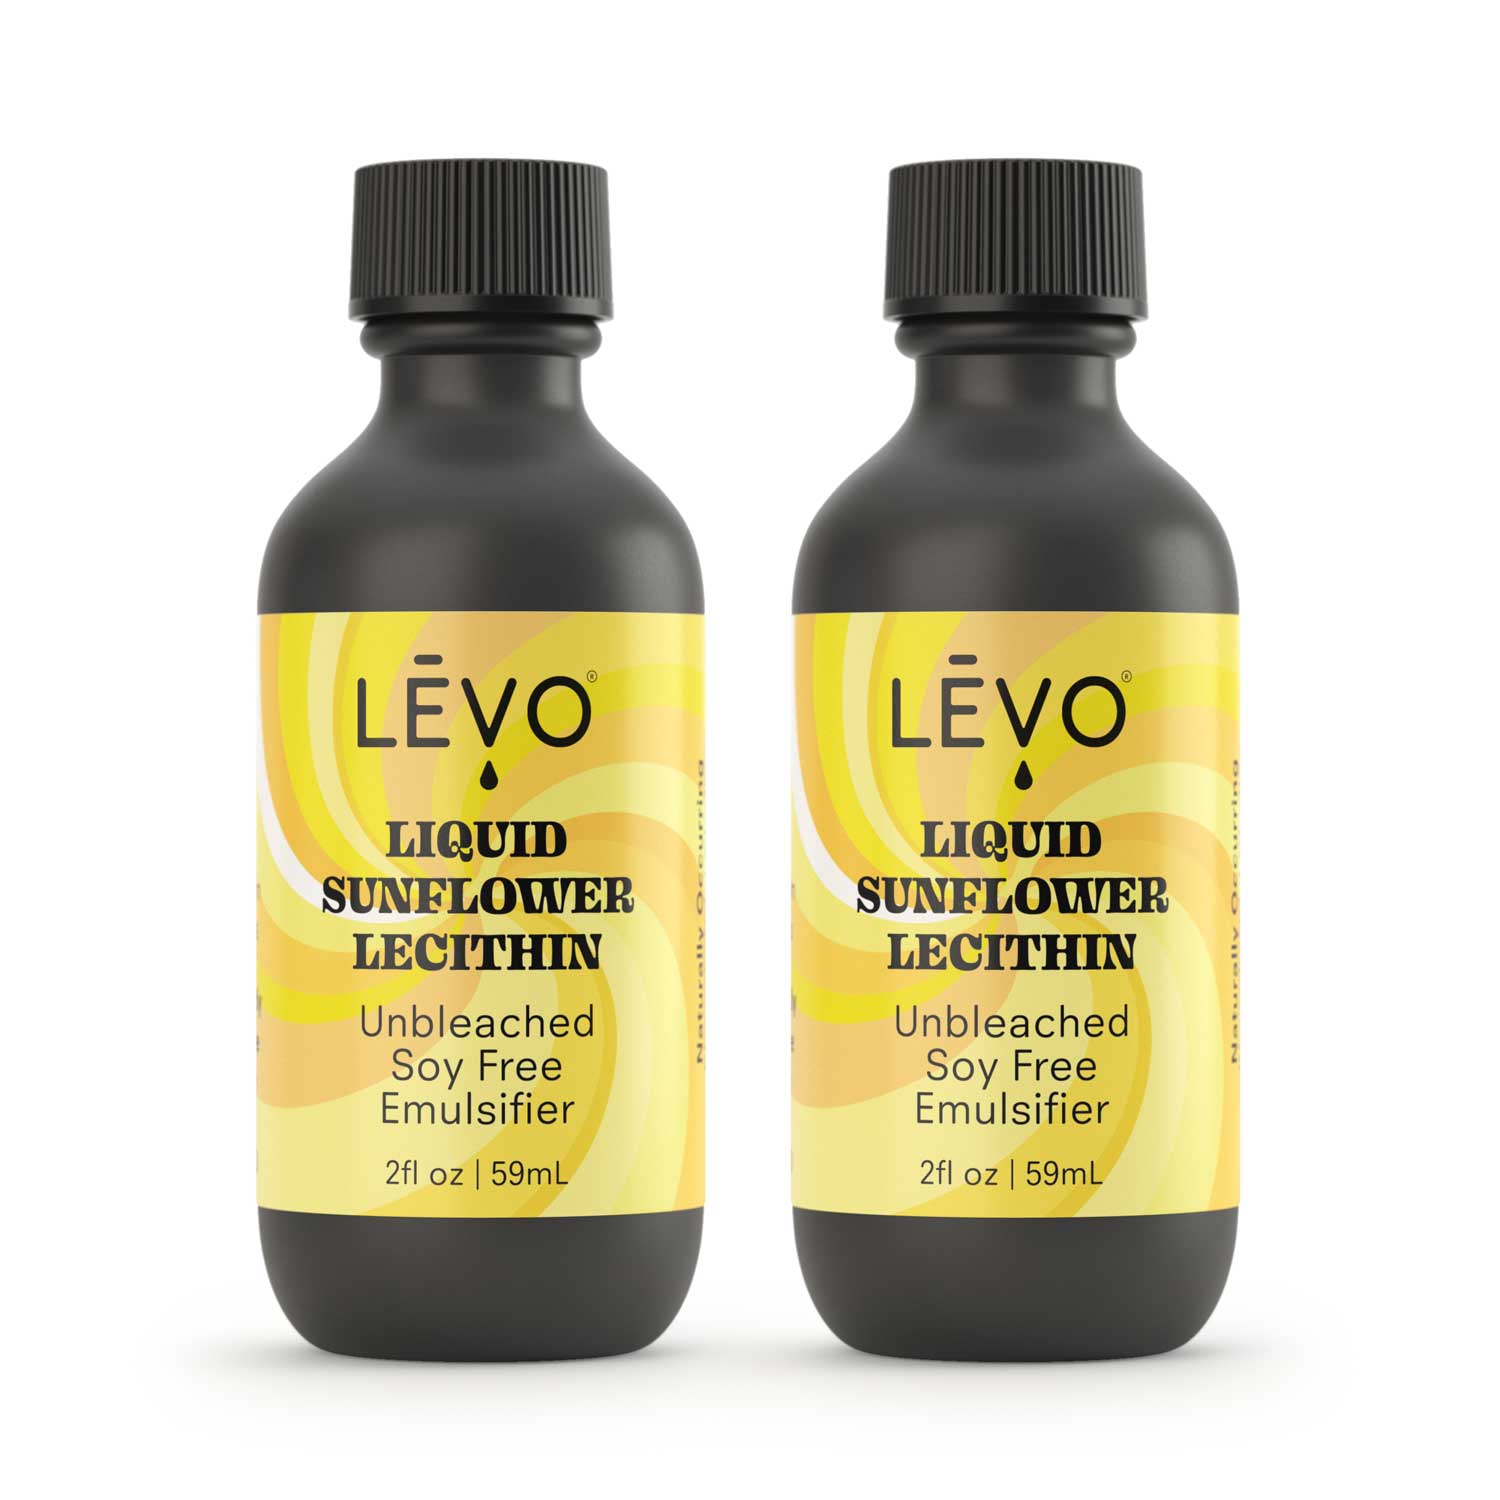 LEVO Lecithin works when making chocolates or baked goods because it binds the infused oil to your water-based ingredients.